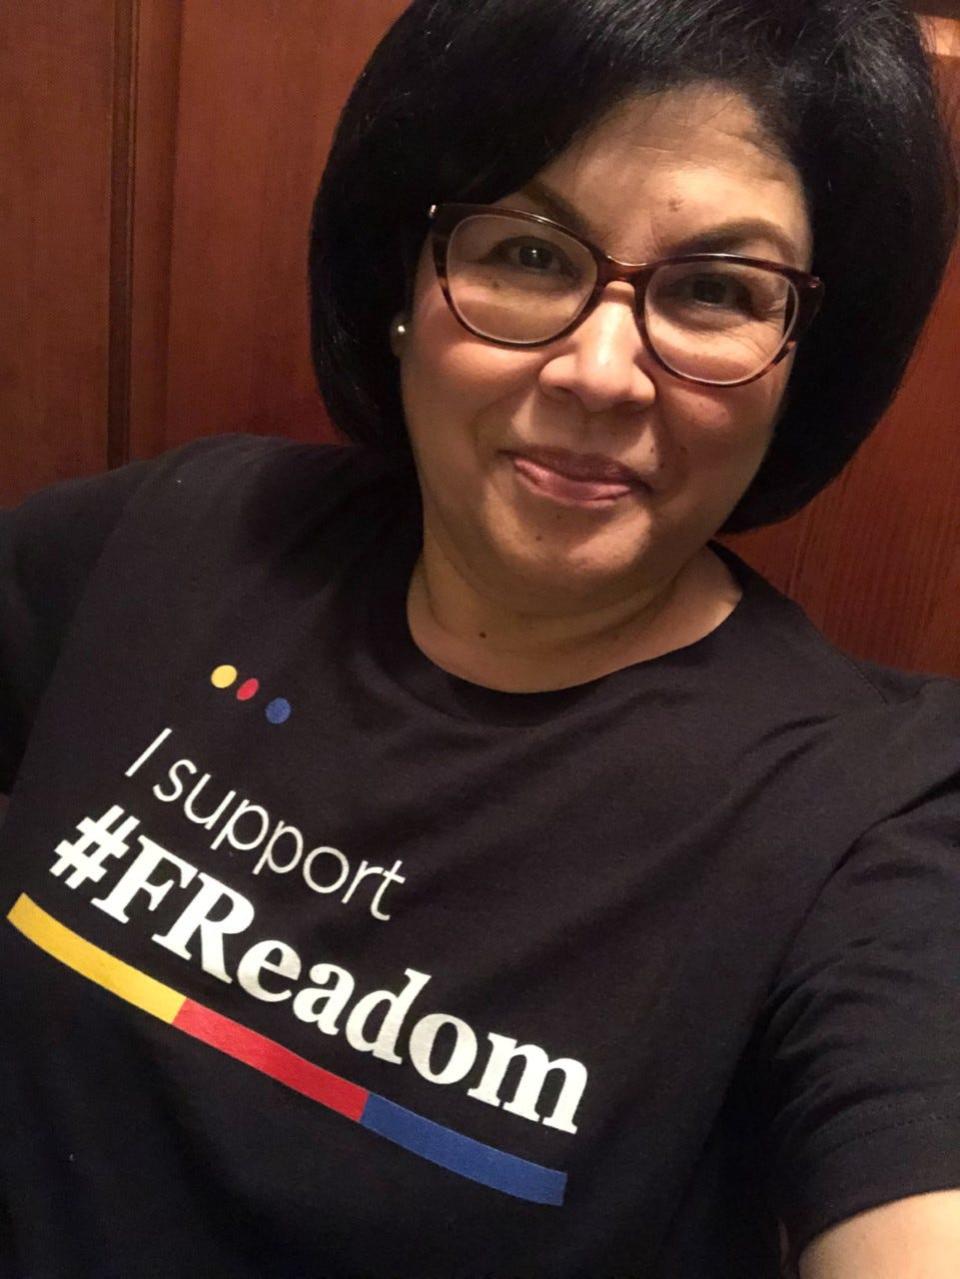 Becky Calzada, a school librarian in Texas, and two of her peers co-founded a group called the FReadom Fighters with the idea of pushing back against censorship efforts in school libraries.